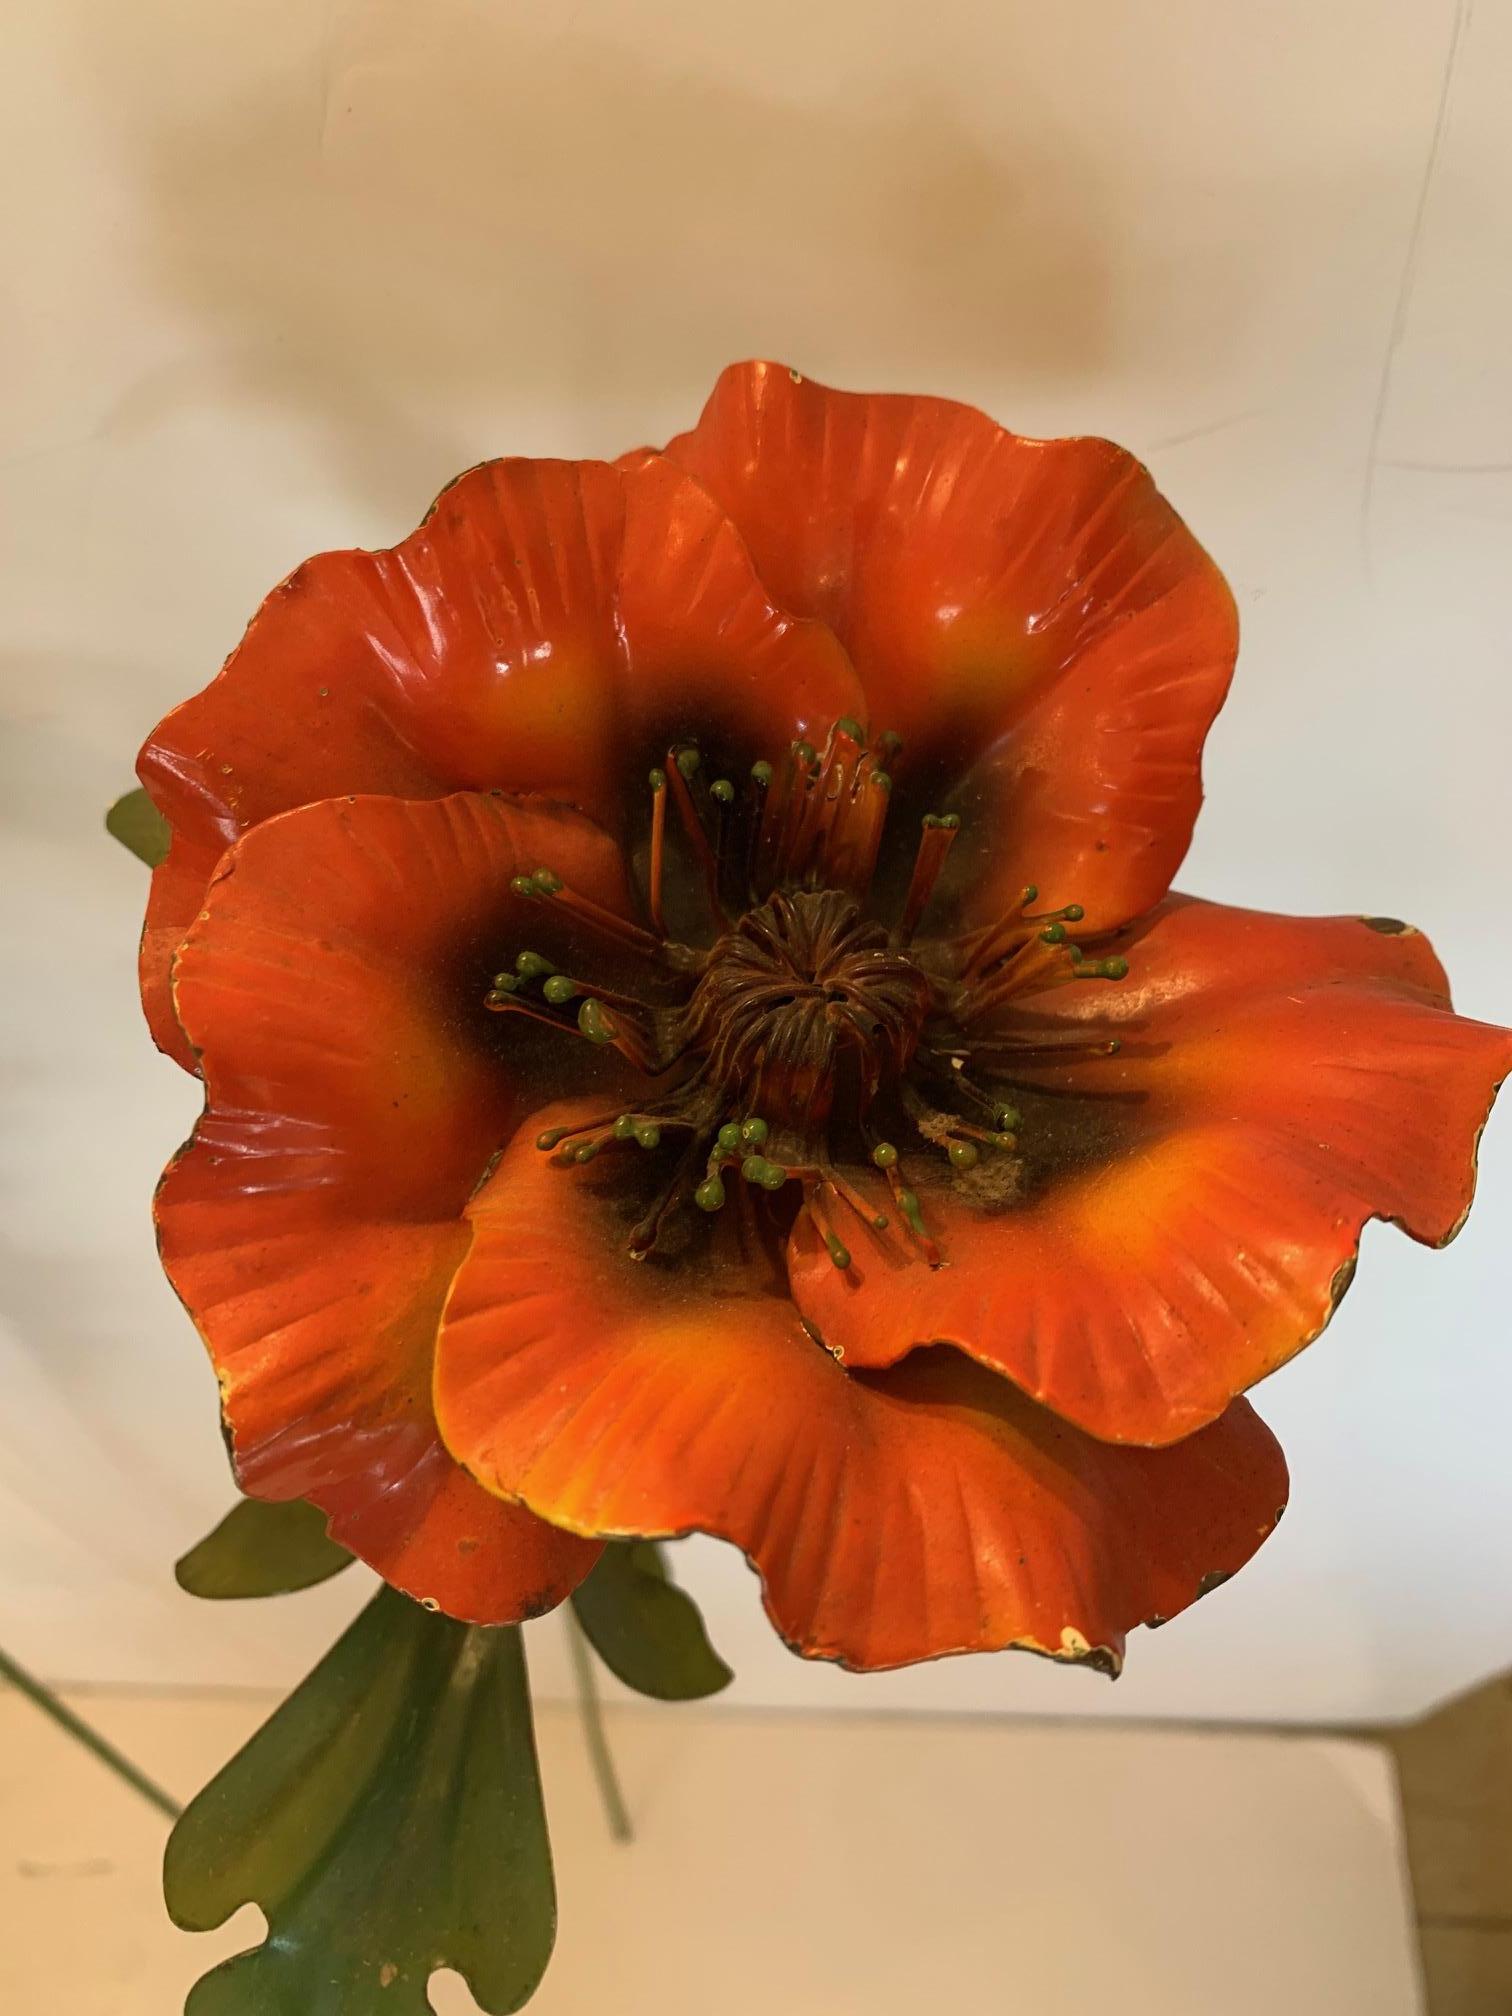 A wonderful decorative set of 4 elongated painted iron poppy flowers having orange and black flowers and realistic green foliage. Great in a large vase for sculptural flower art!